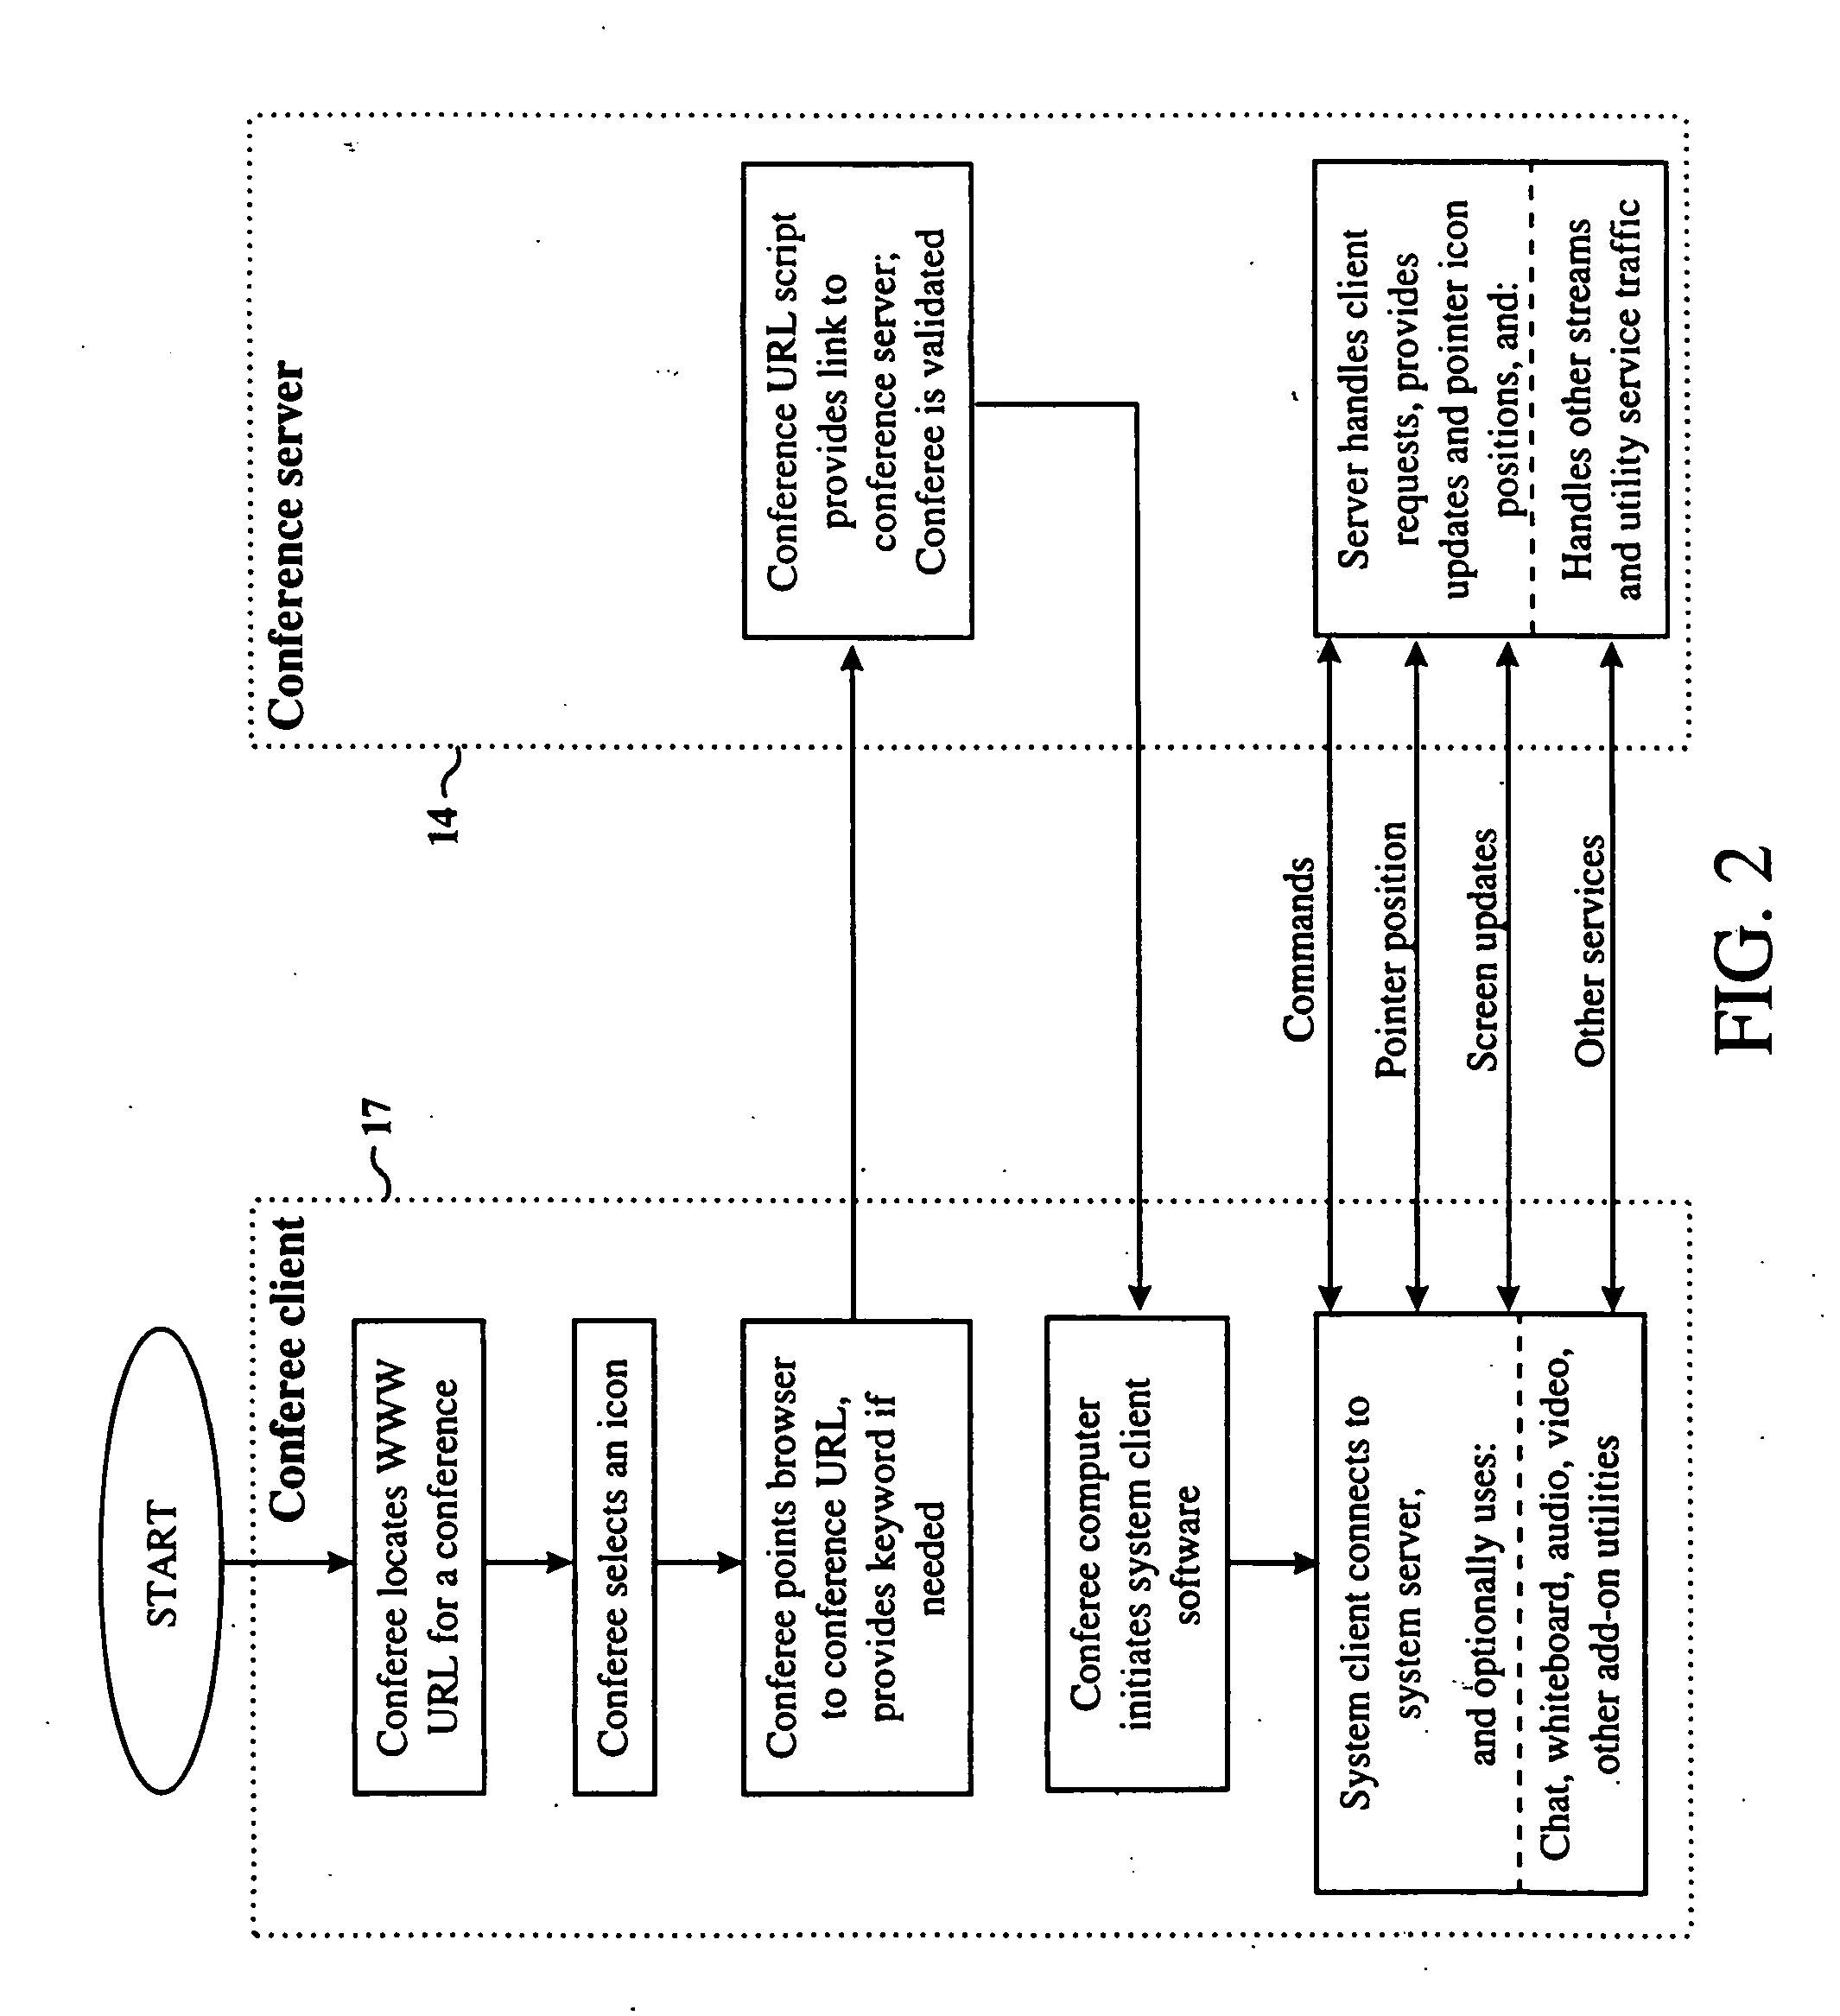 Real-time, multi-point, multi-speed, multi-stream scalable computer network communications system